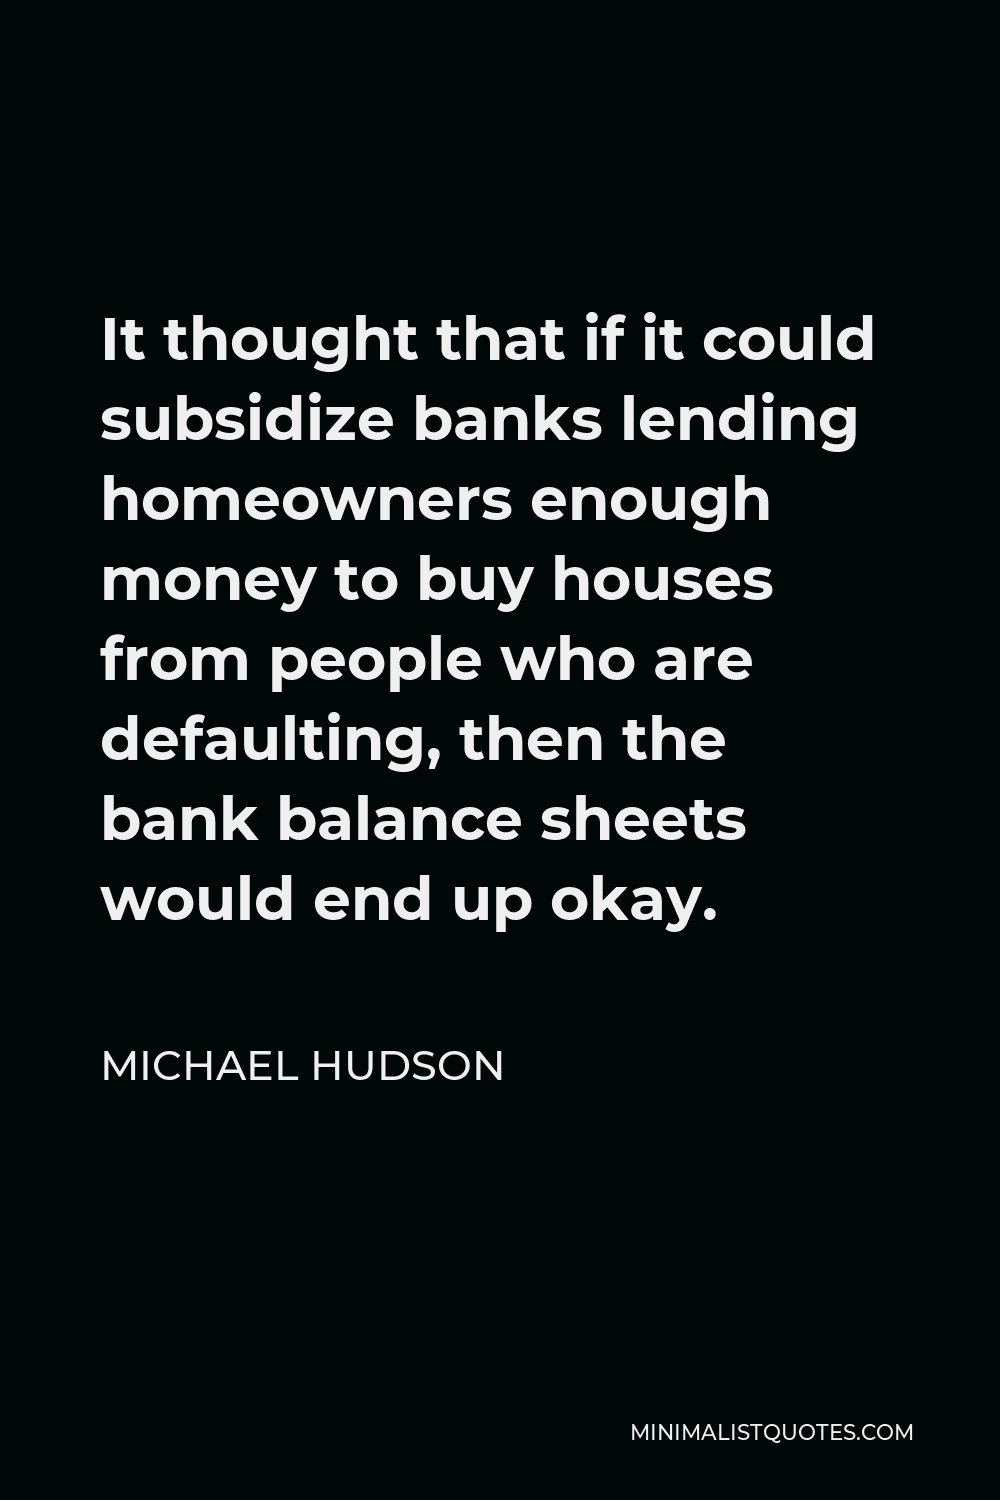 Michael Hudson Quote - It thought that if it could subsidize banks lending homeowners enough money to buy houses from people who are defaulting, then the bank balance sheets would end up okay.